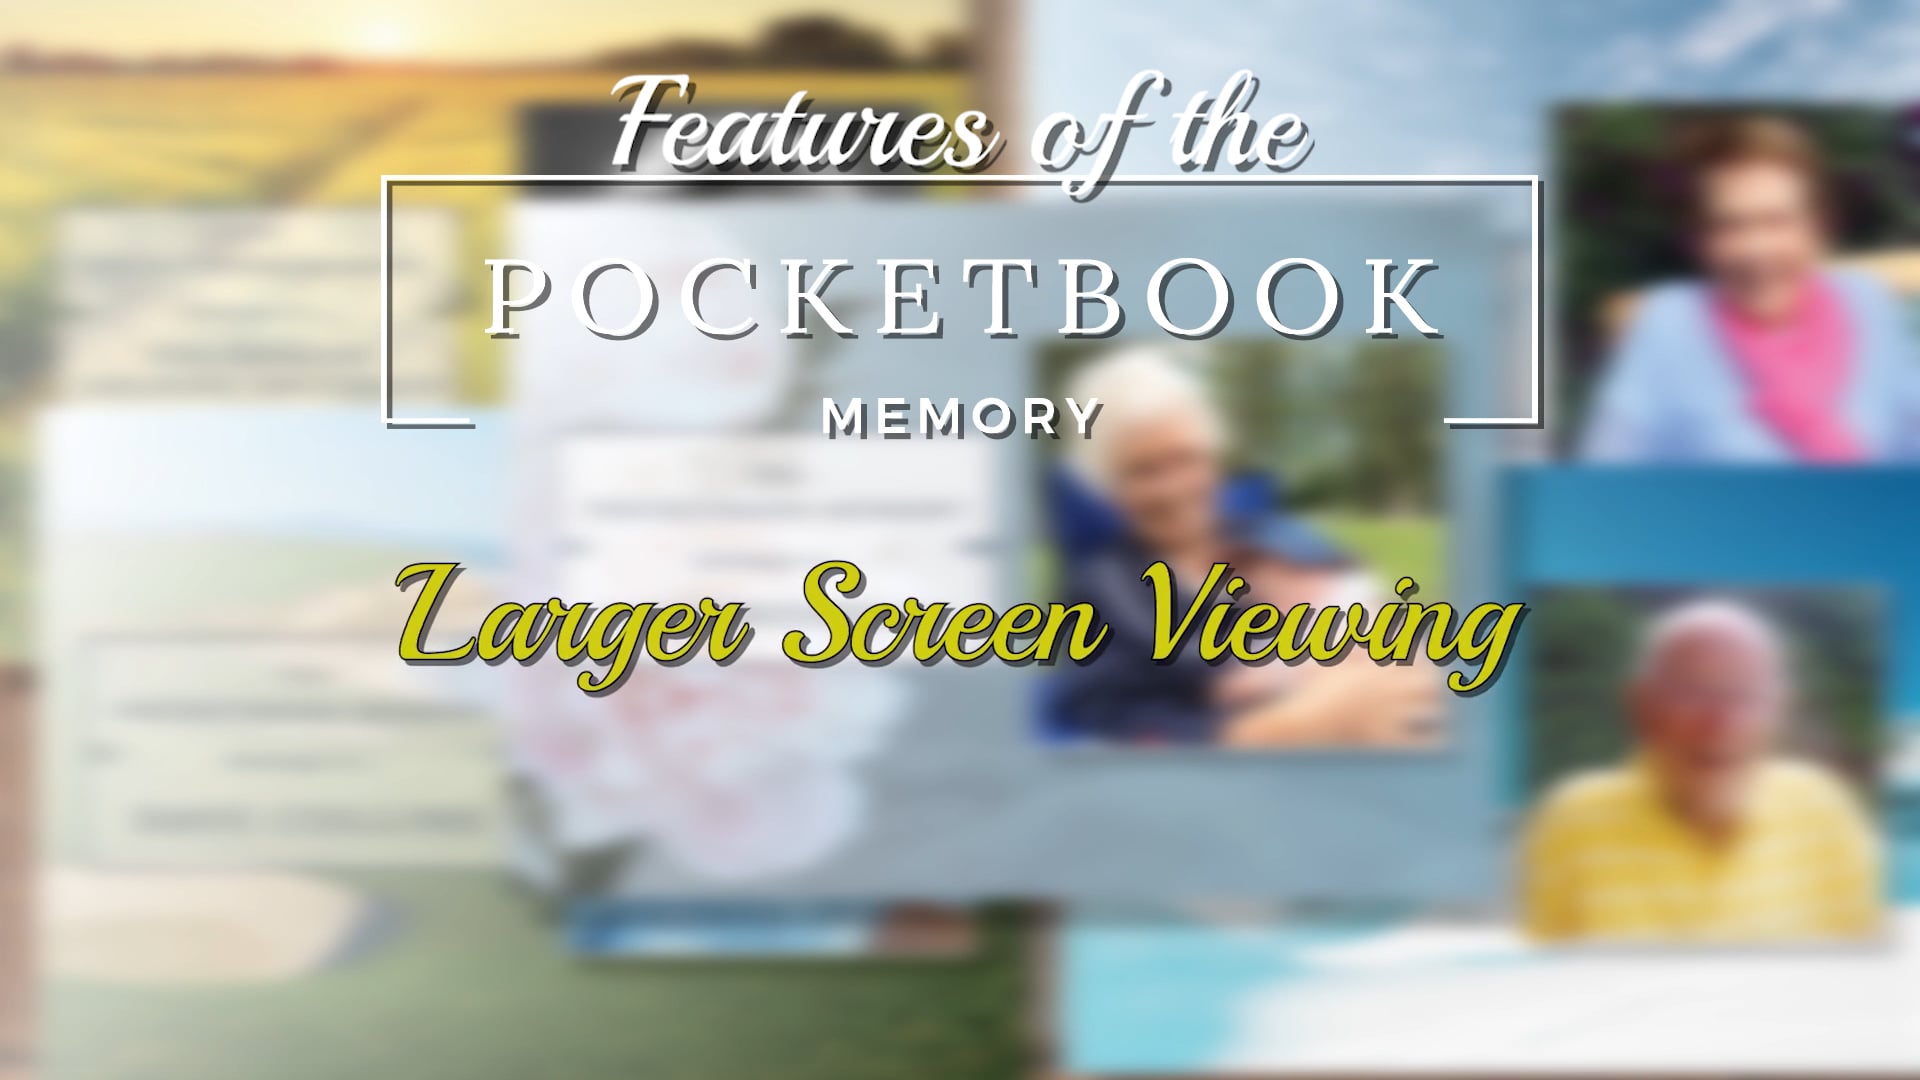 PocketBook Memory Features 'Larger Screen'